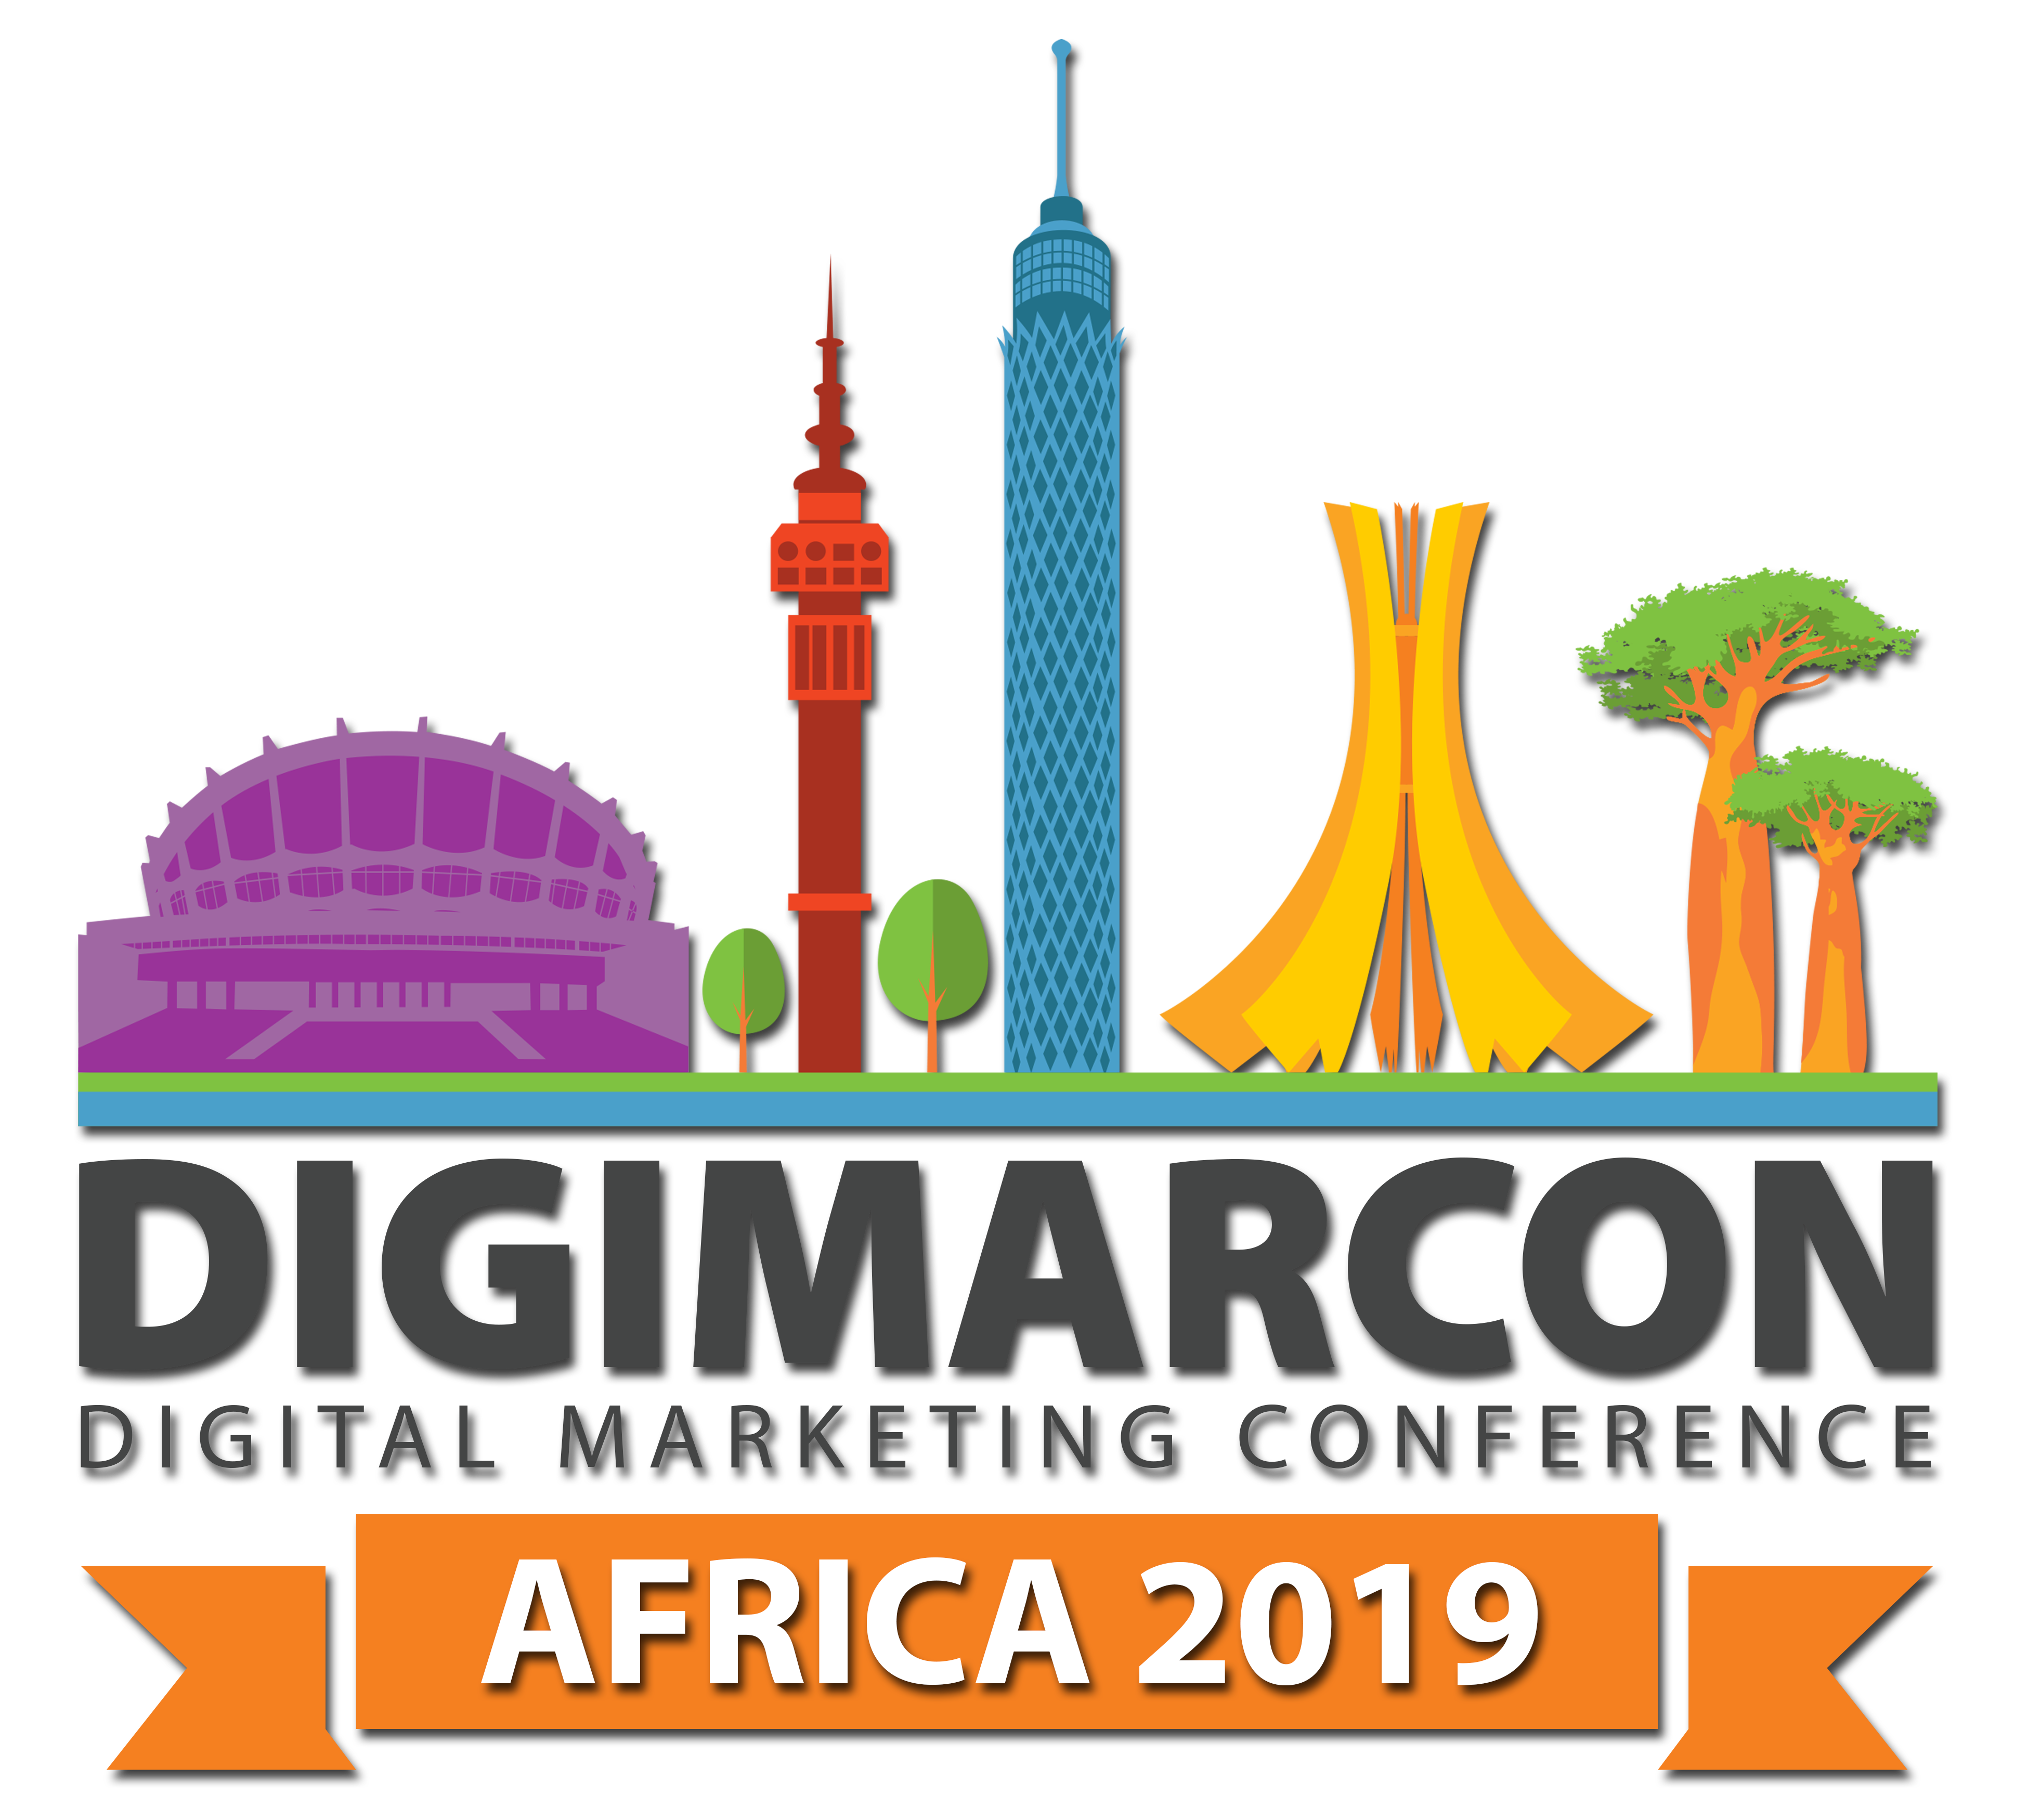 DigiMarCon Africa 2019 - Digital Marketing Conference & Exhibition, Johannesburg, South Africa